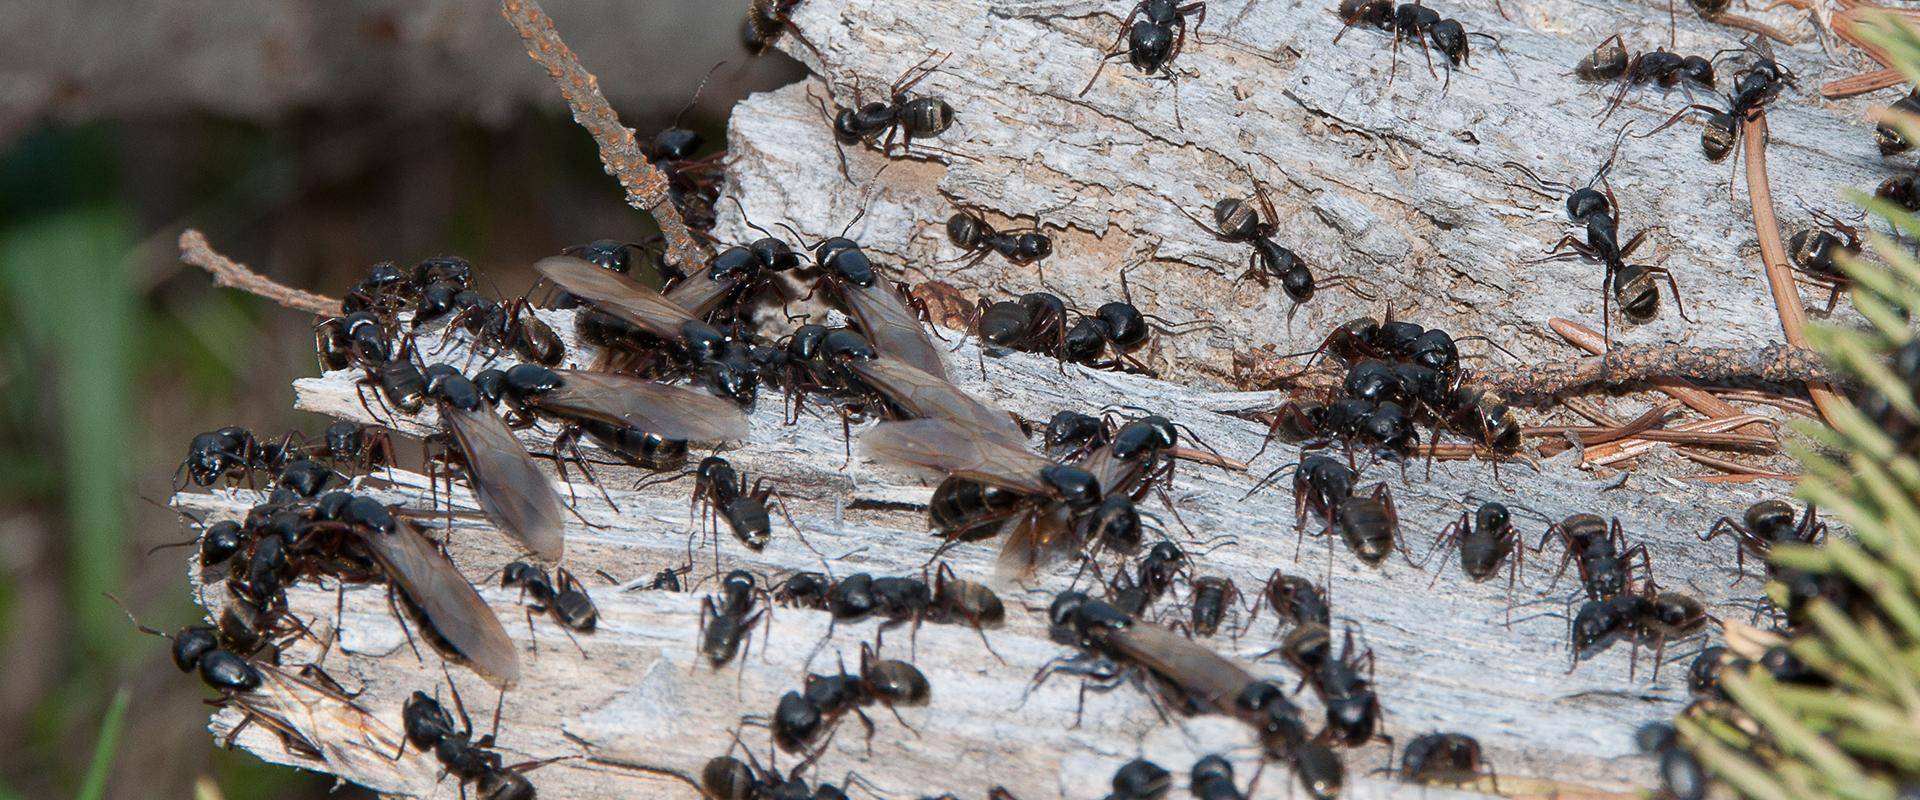 ants on wood in oklahoma city